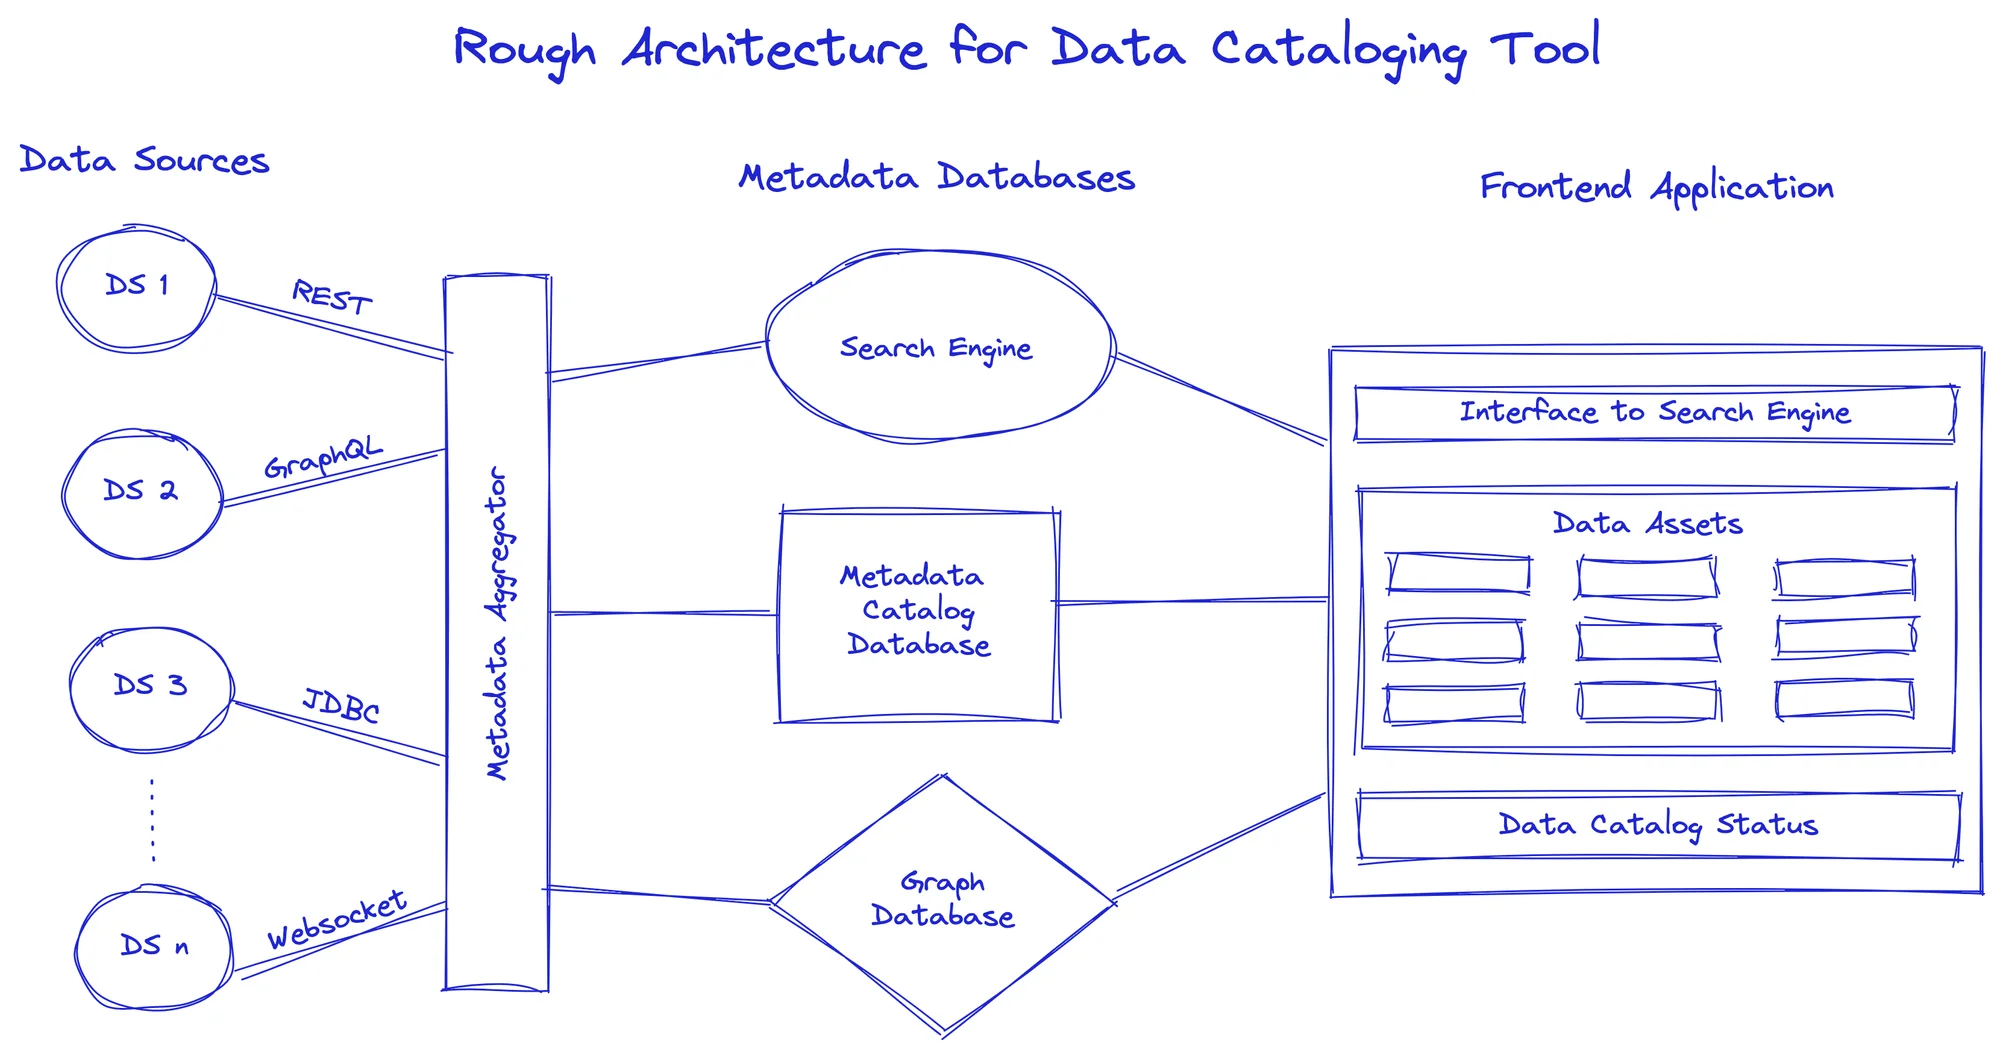 Outlining a rough architecture for a data catalog